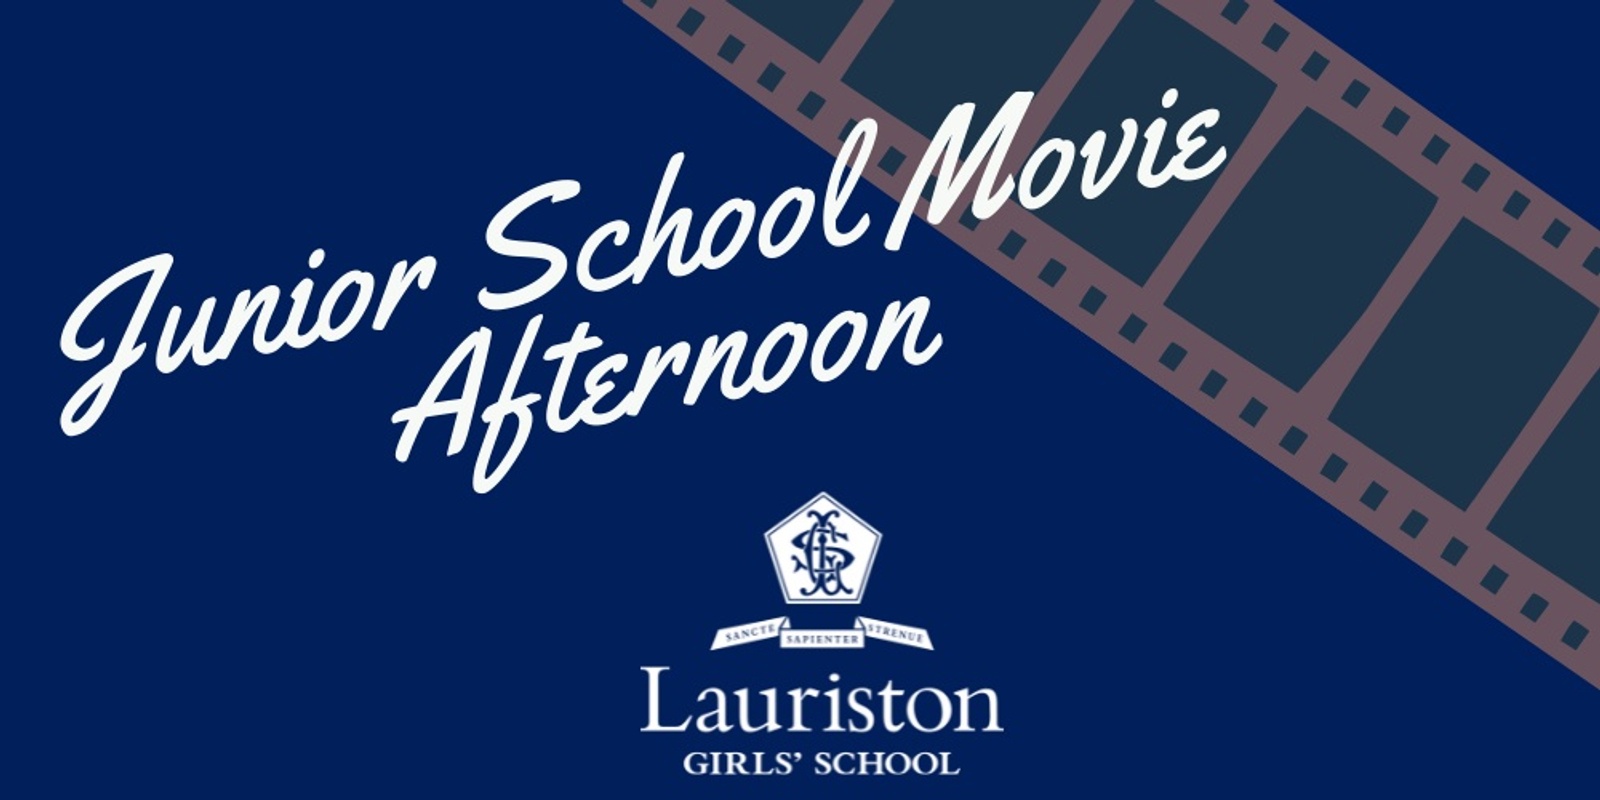 Banner image for Junior School Movie Afternoon 